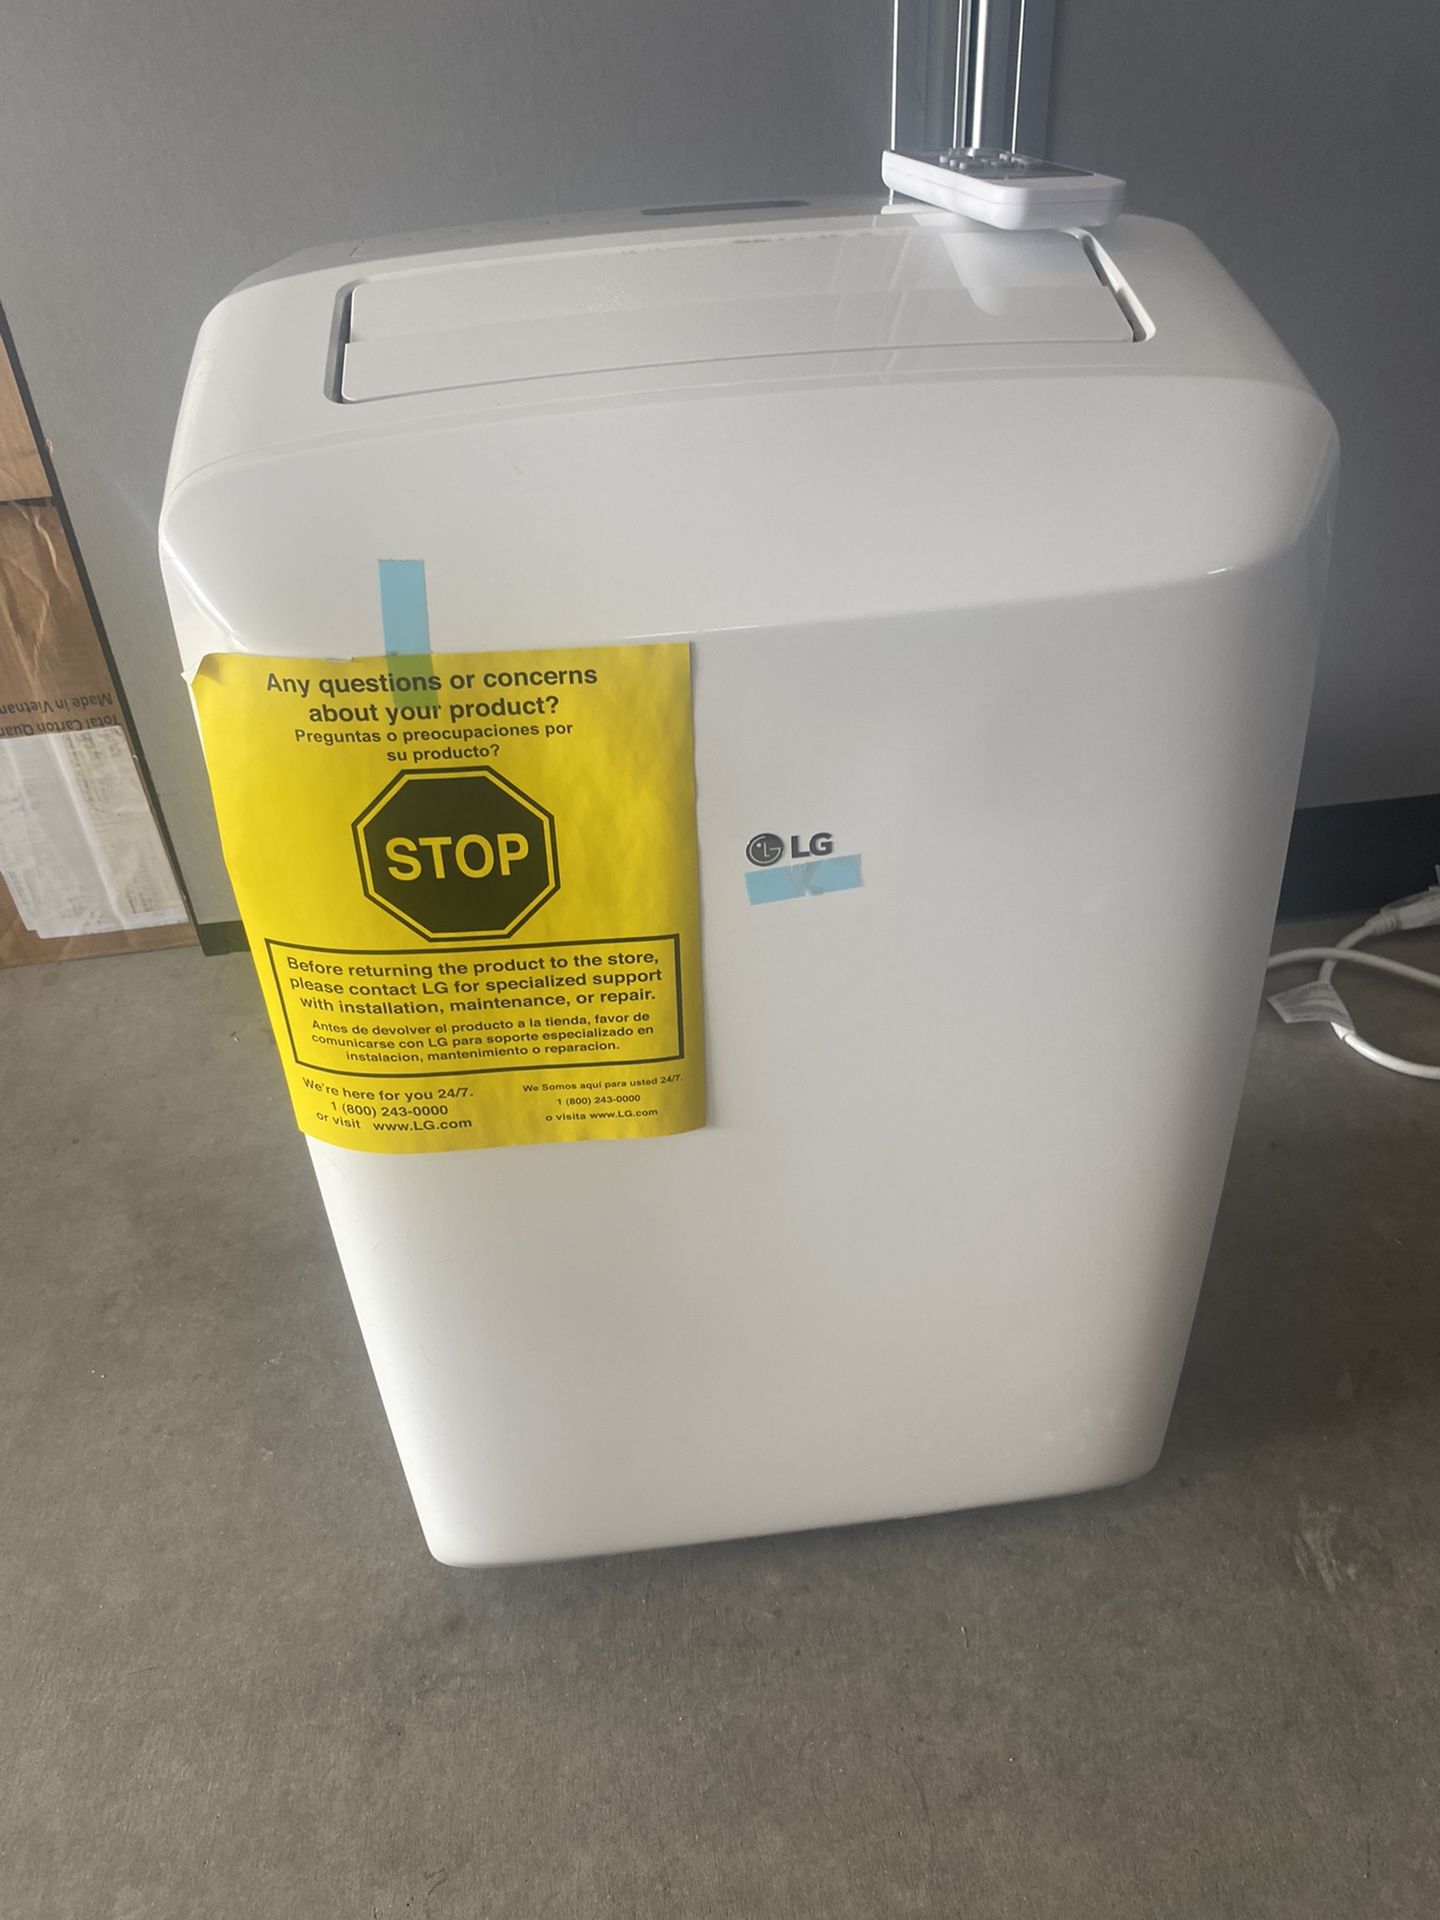 LG portable Air Conditioner.  Fit For A Window Unit. Was Used For A Temporary For An Office Space